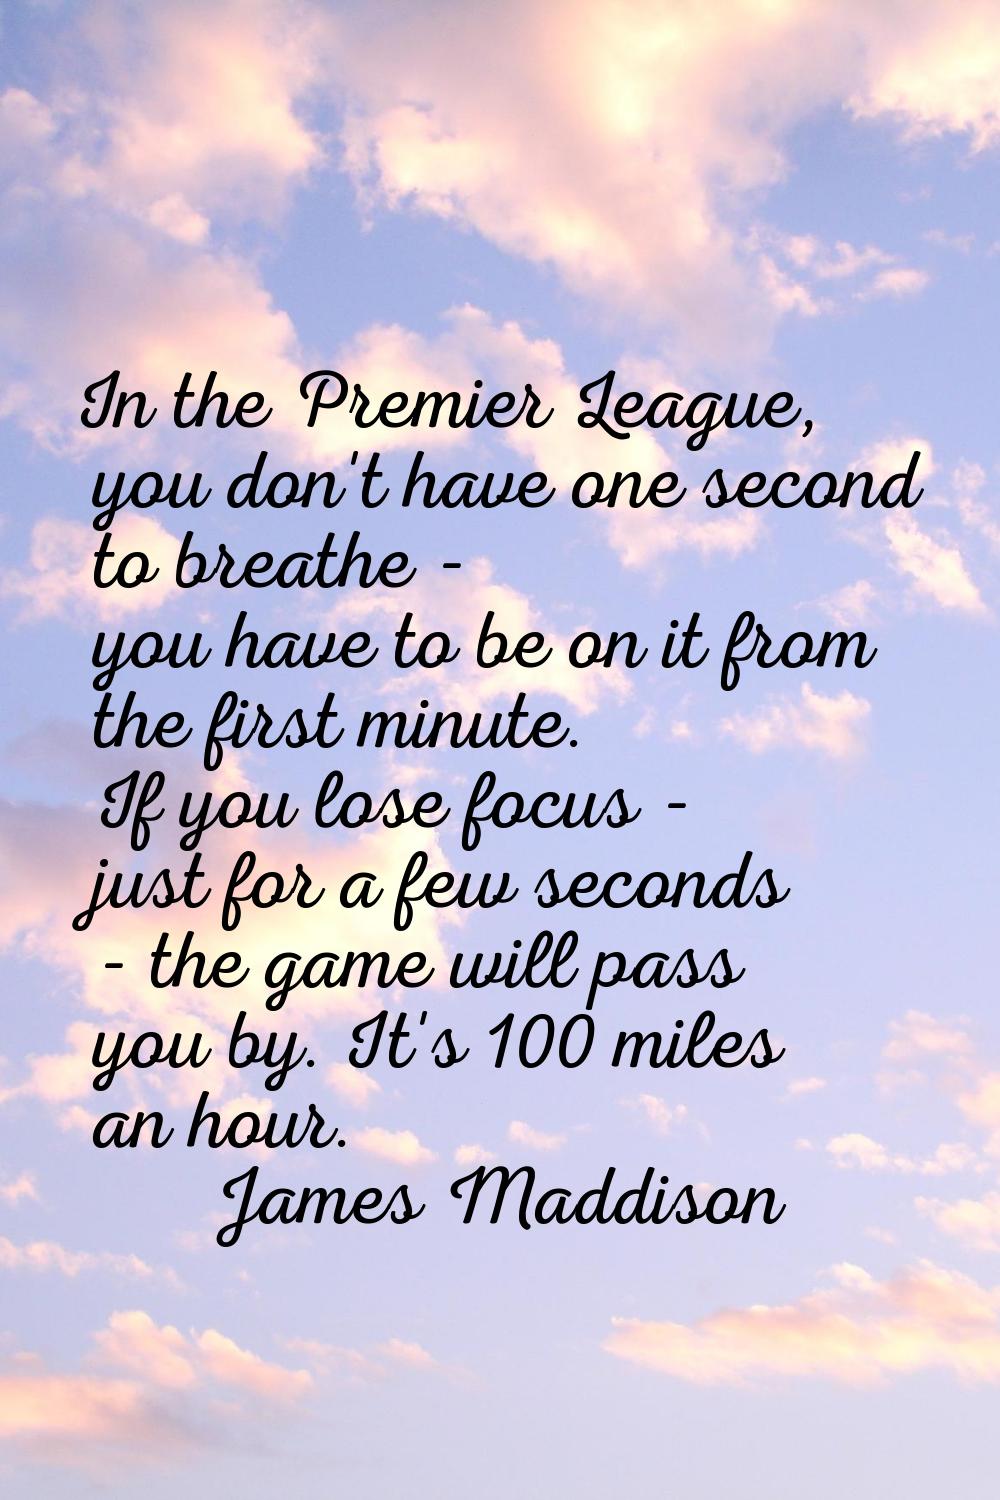 In the Premier League, you don't have one second to breathe - you have to be on it from the first m